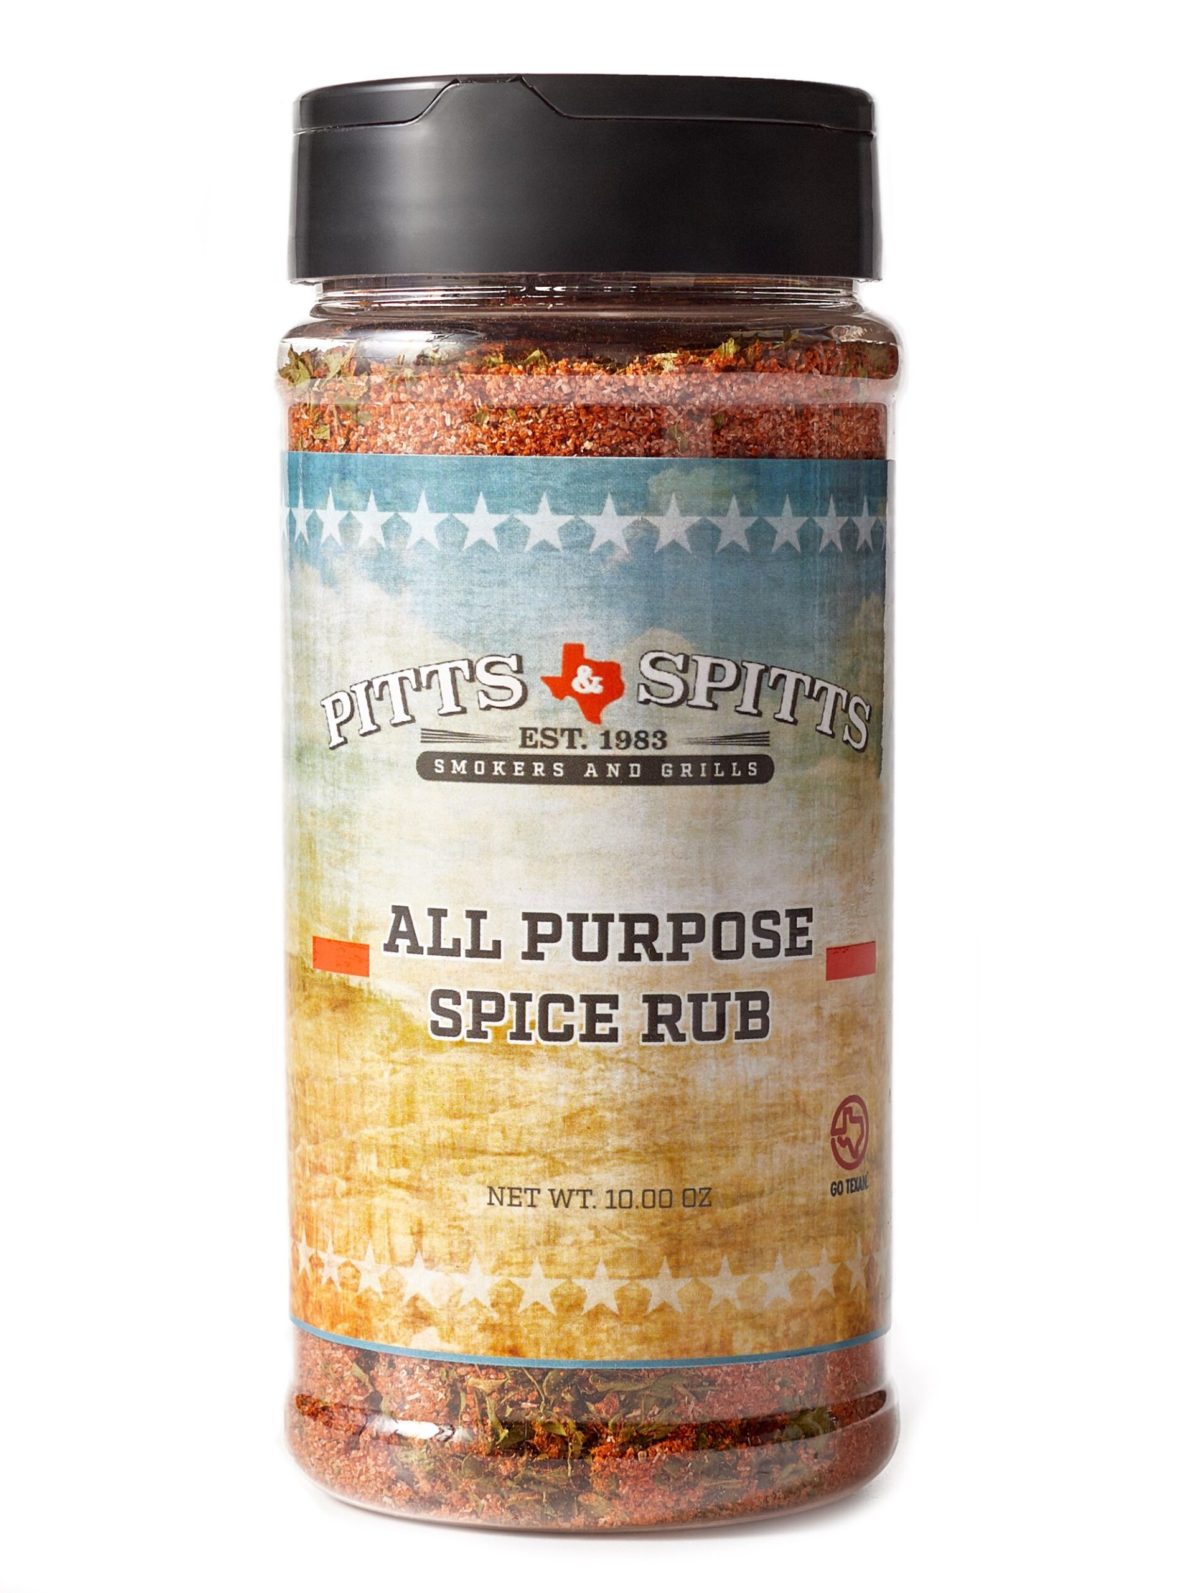 All Purpose Spice Rub - Pitts & Spitts